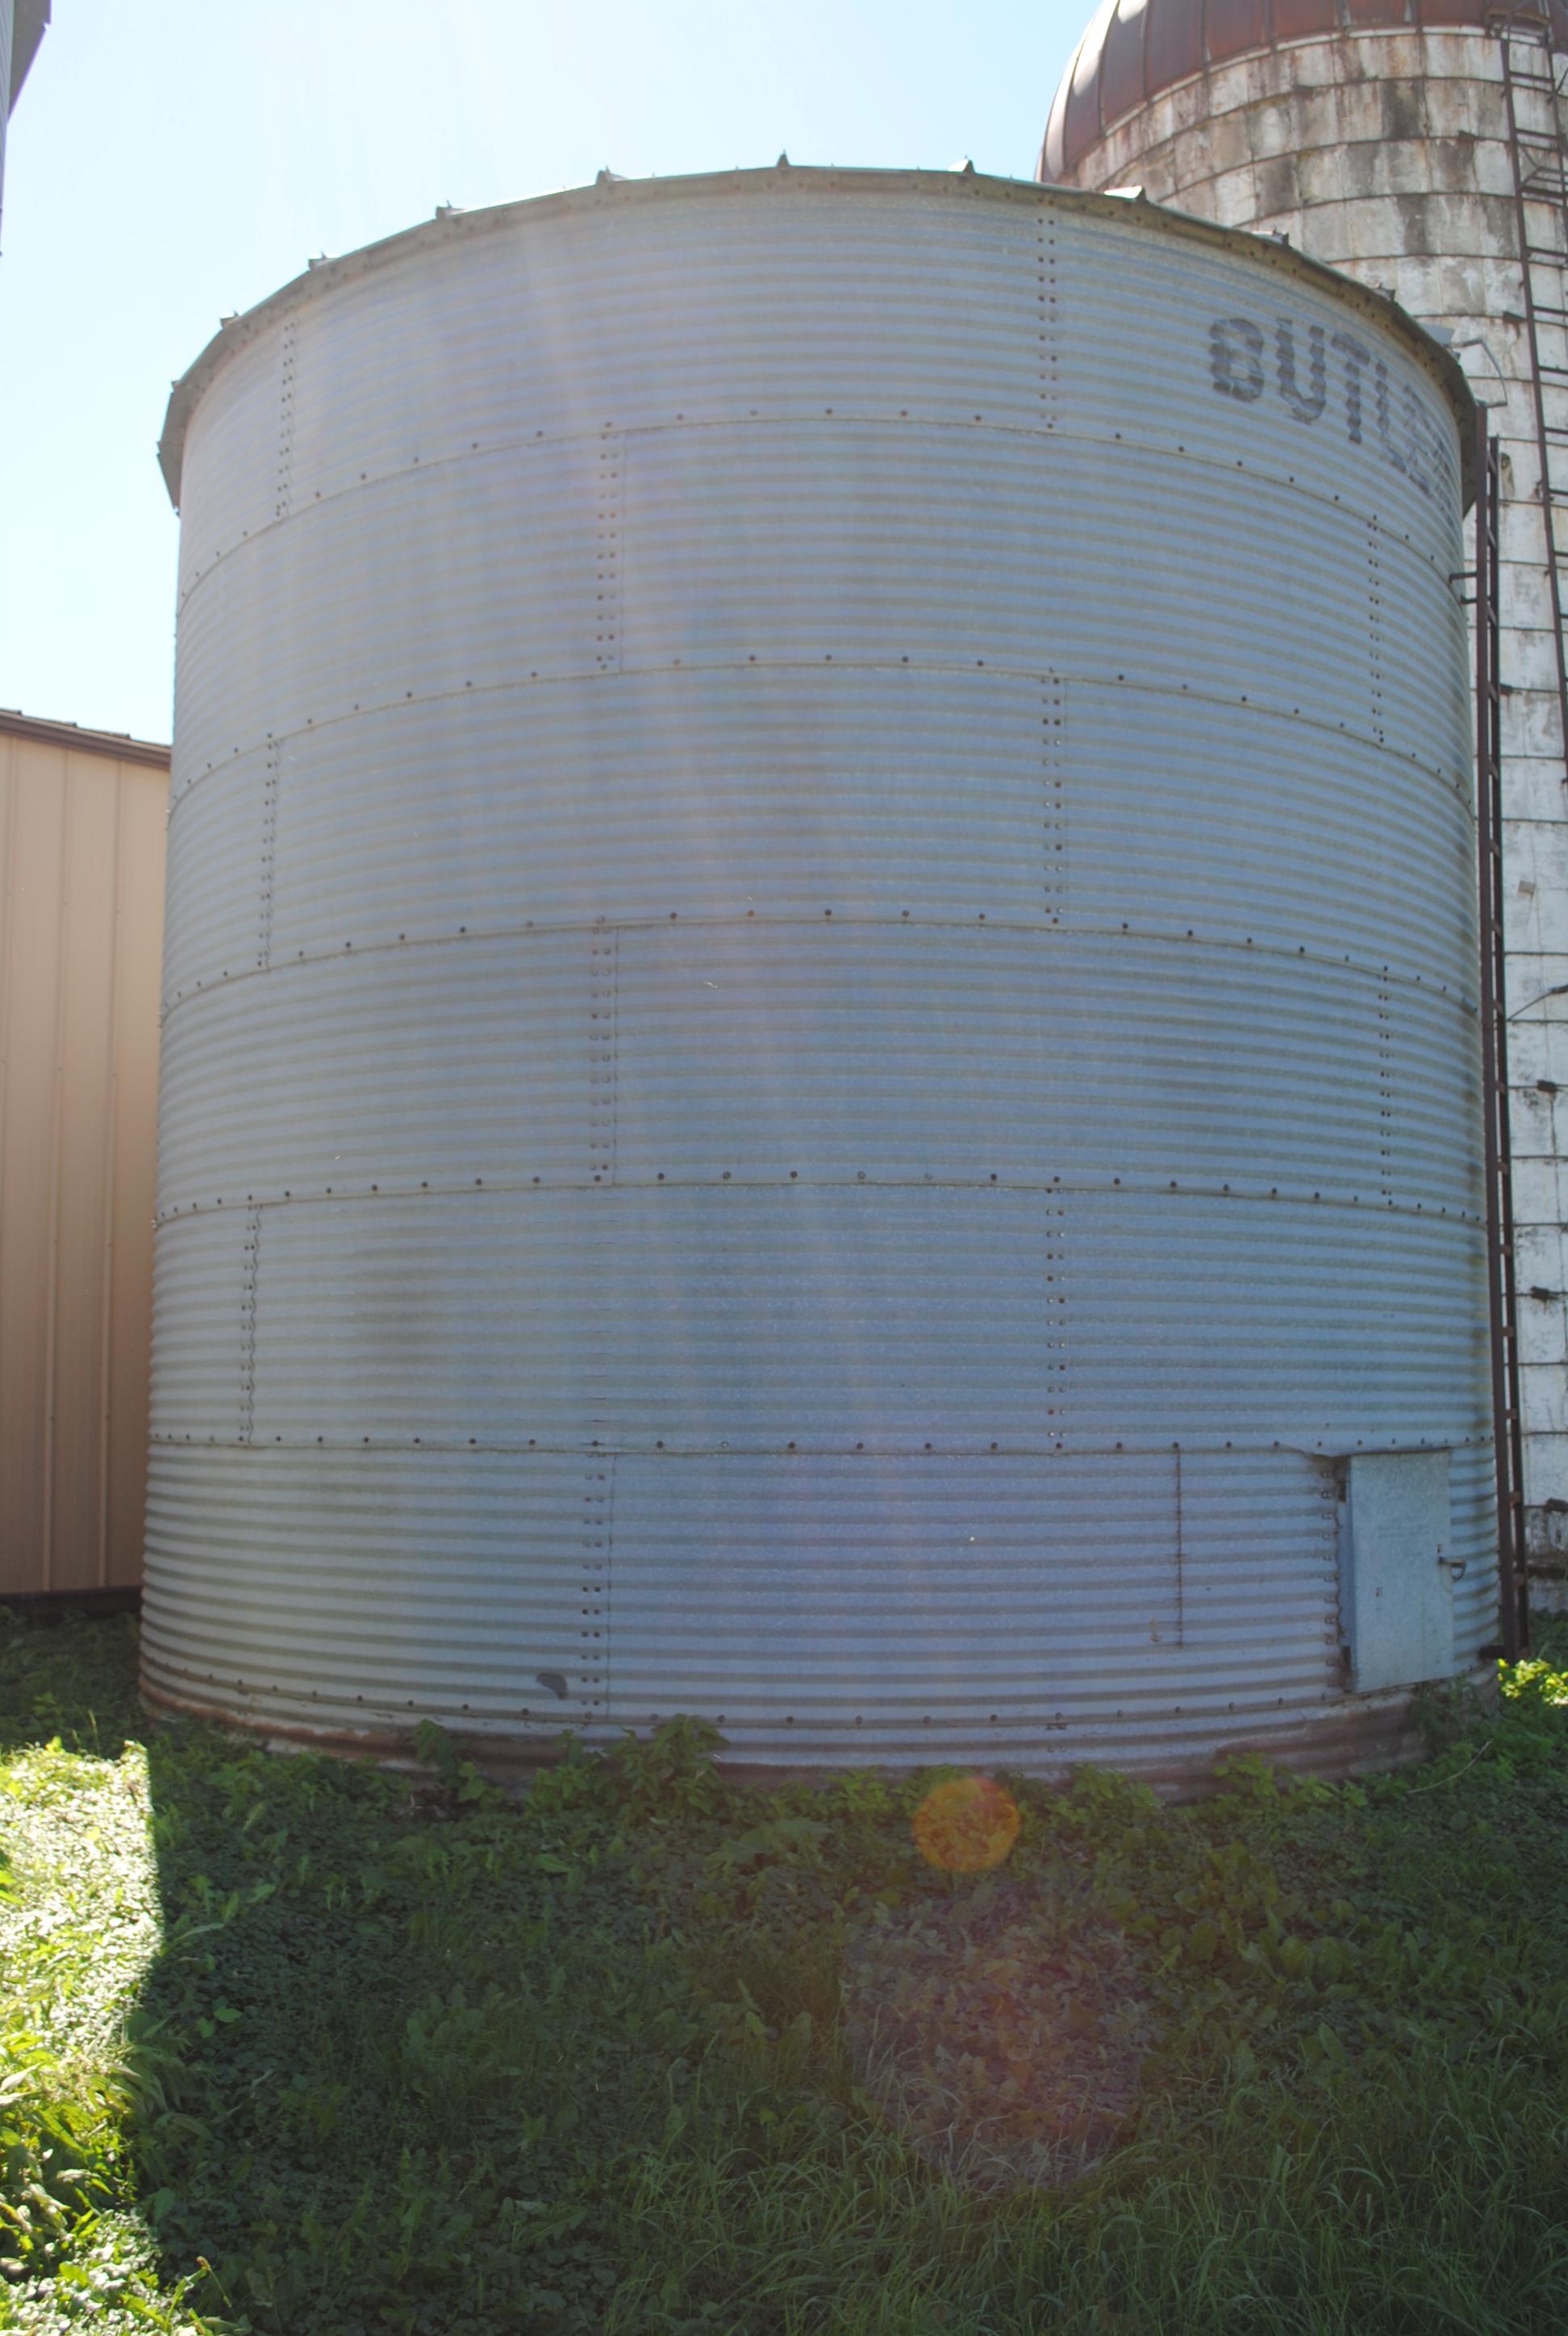 Butler 7-ring grain bin, approx. 18' high and 18' wide, has side ladder. The bottom ring is half bur